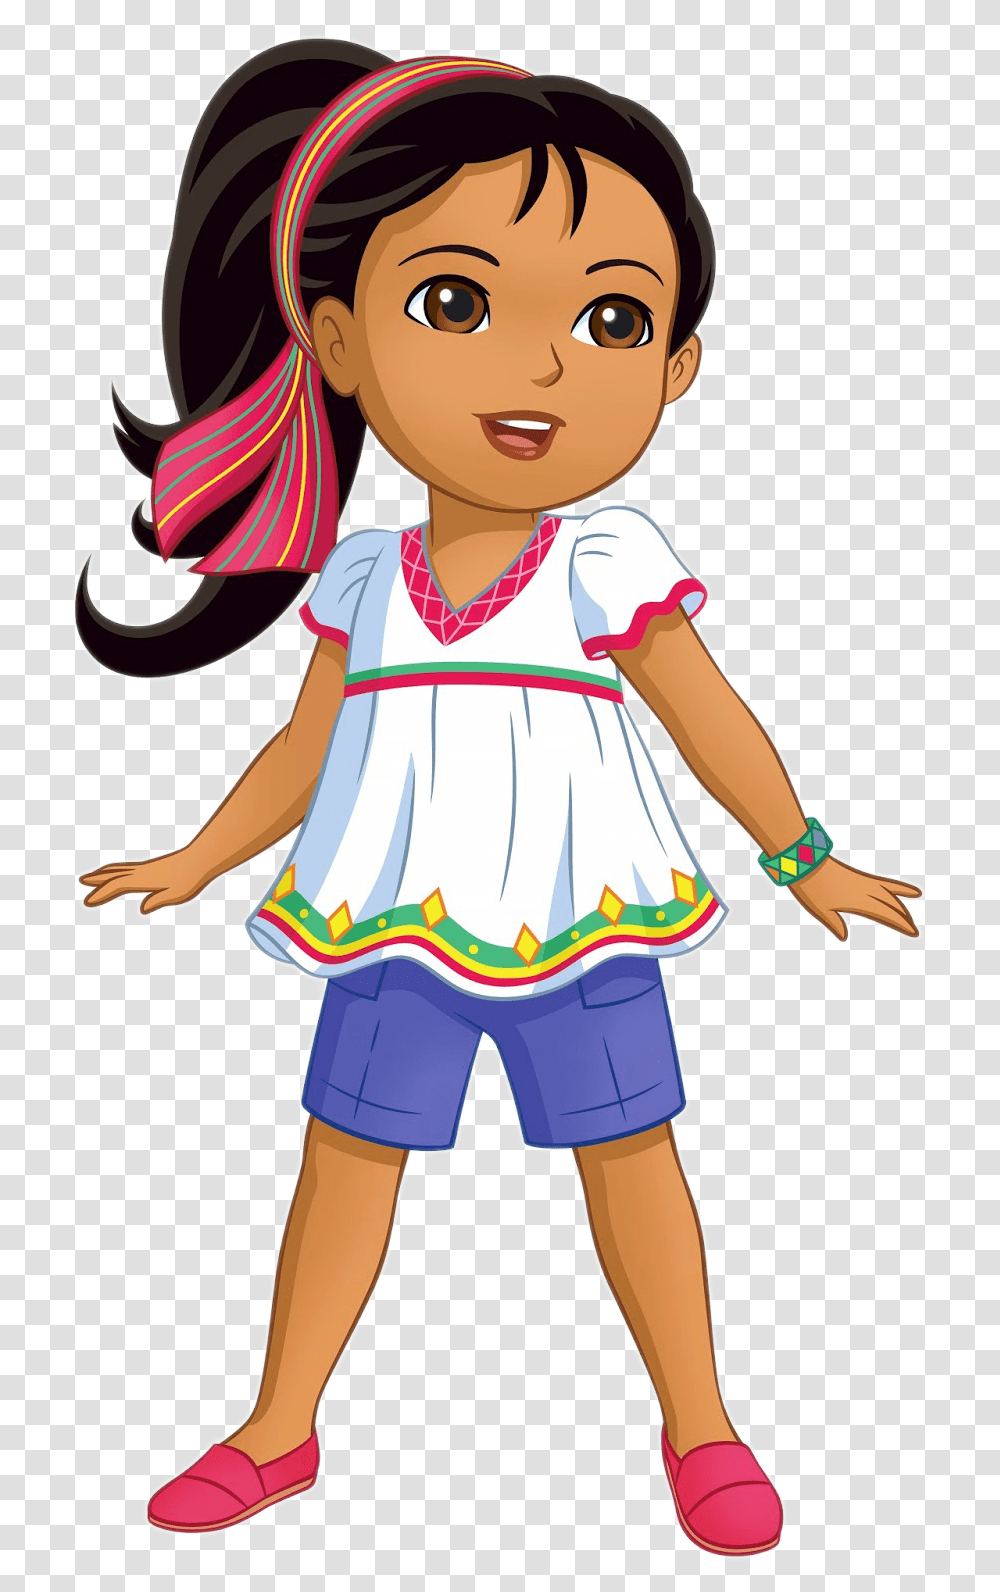 Dora And Friends Download Dora And Friends, Female, Person, Human, Costume Transparent Png